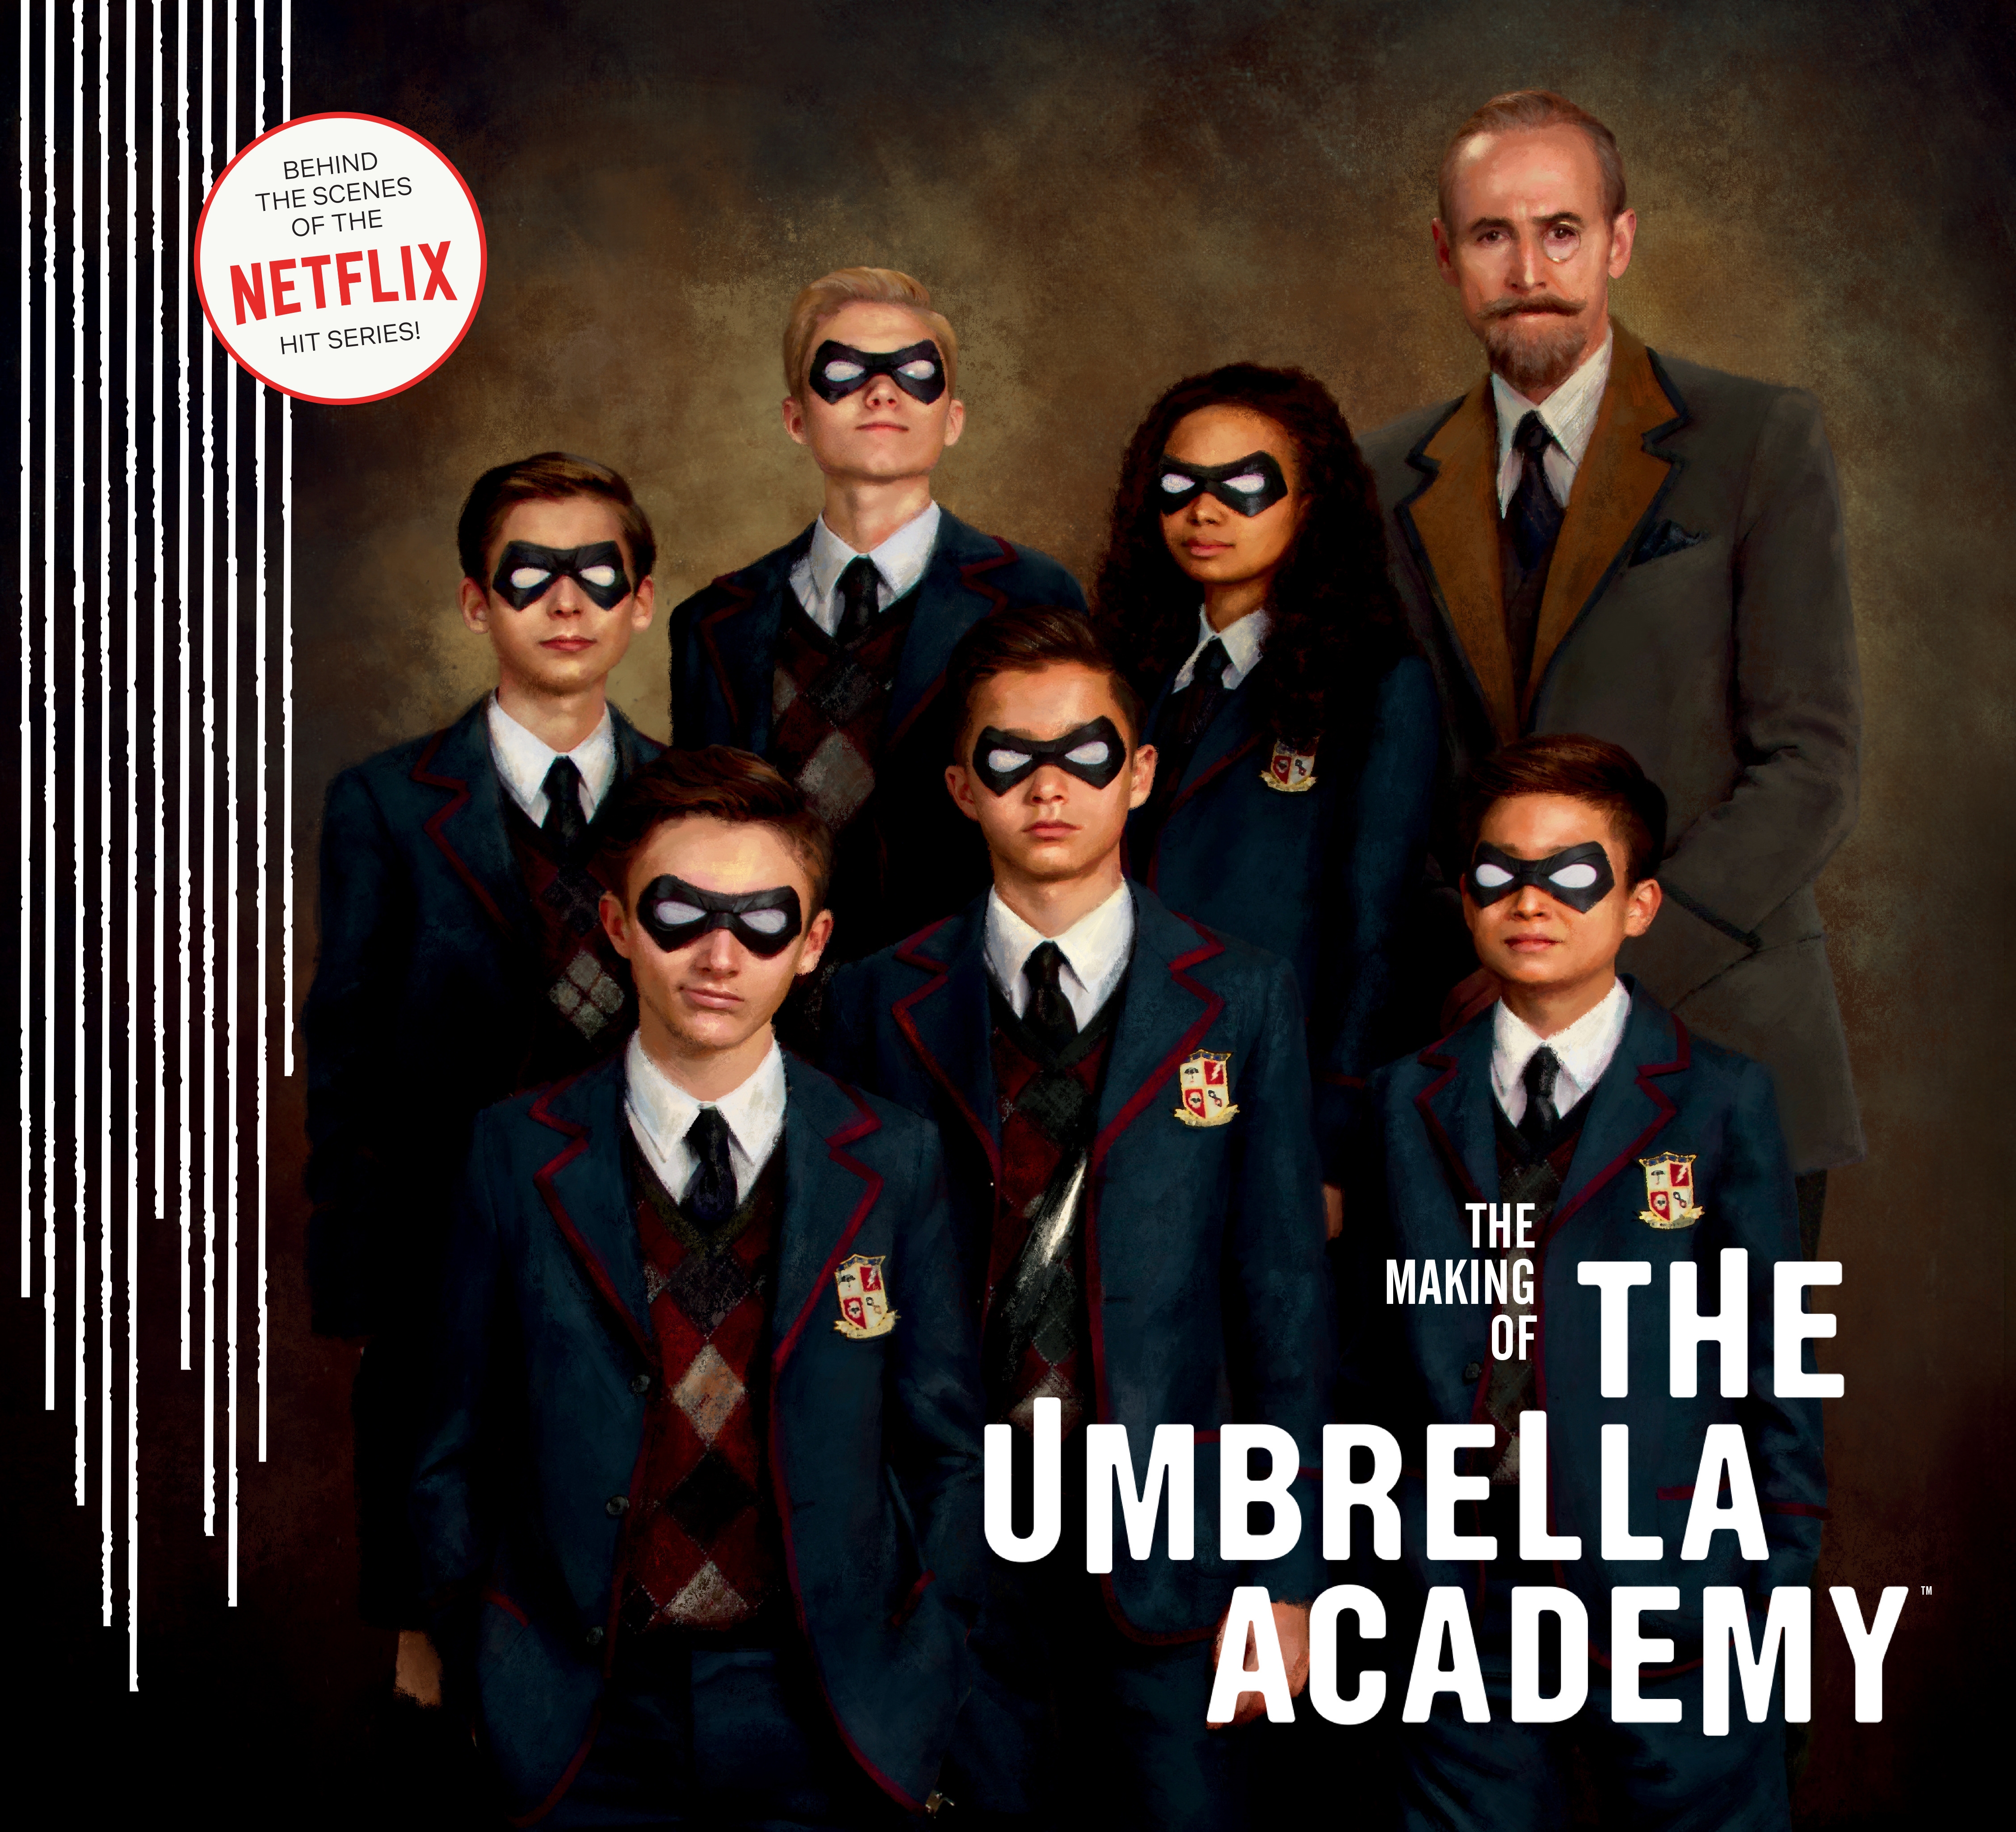 The Making of The Umbrella Academy by Gerard Way - Penguin Books Australia